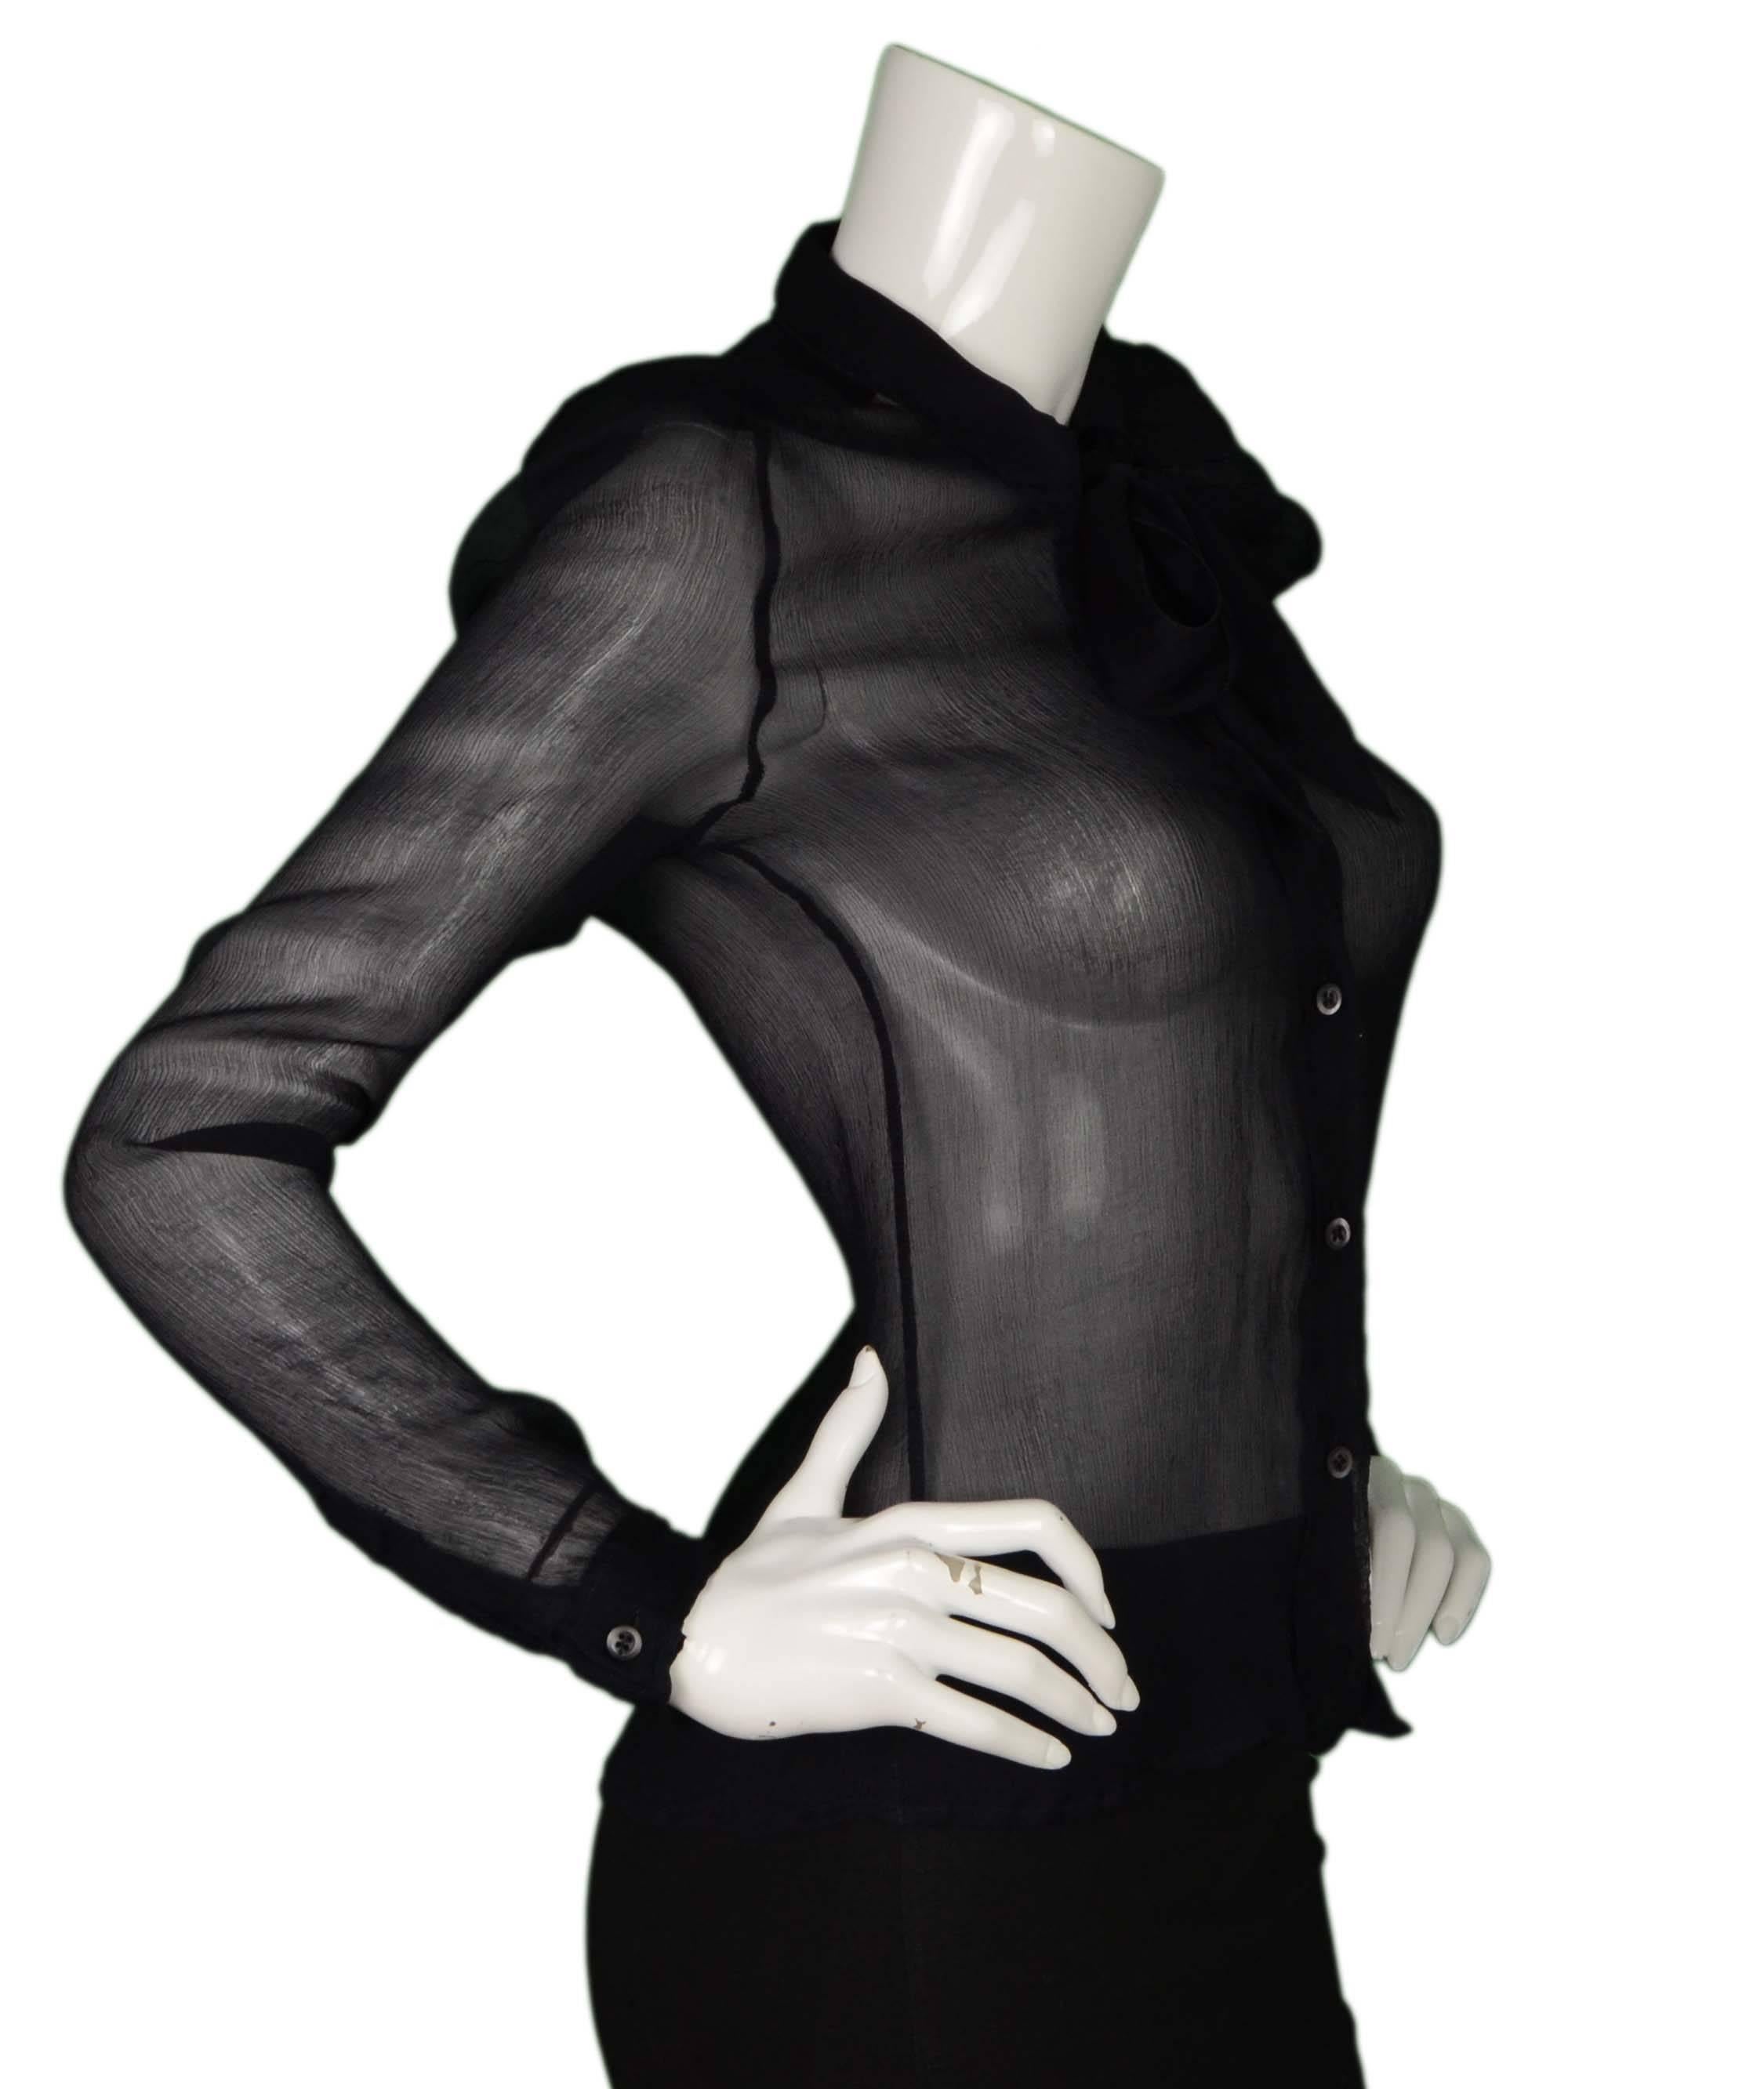 Prada Black Sheer Silk Long Sleeve Blouse
Features tie at neck
Made In: Italy
Color: Black
Composition: 100% silk 
Lining: None
Closure/Opening: Button down front with tie at neckline
Exterior Pockets: None
Interior Pockets: None
Overall